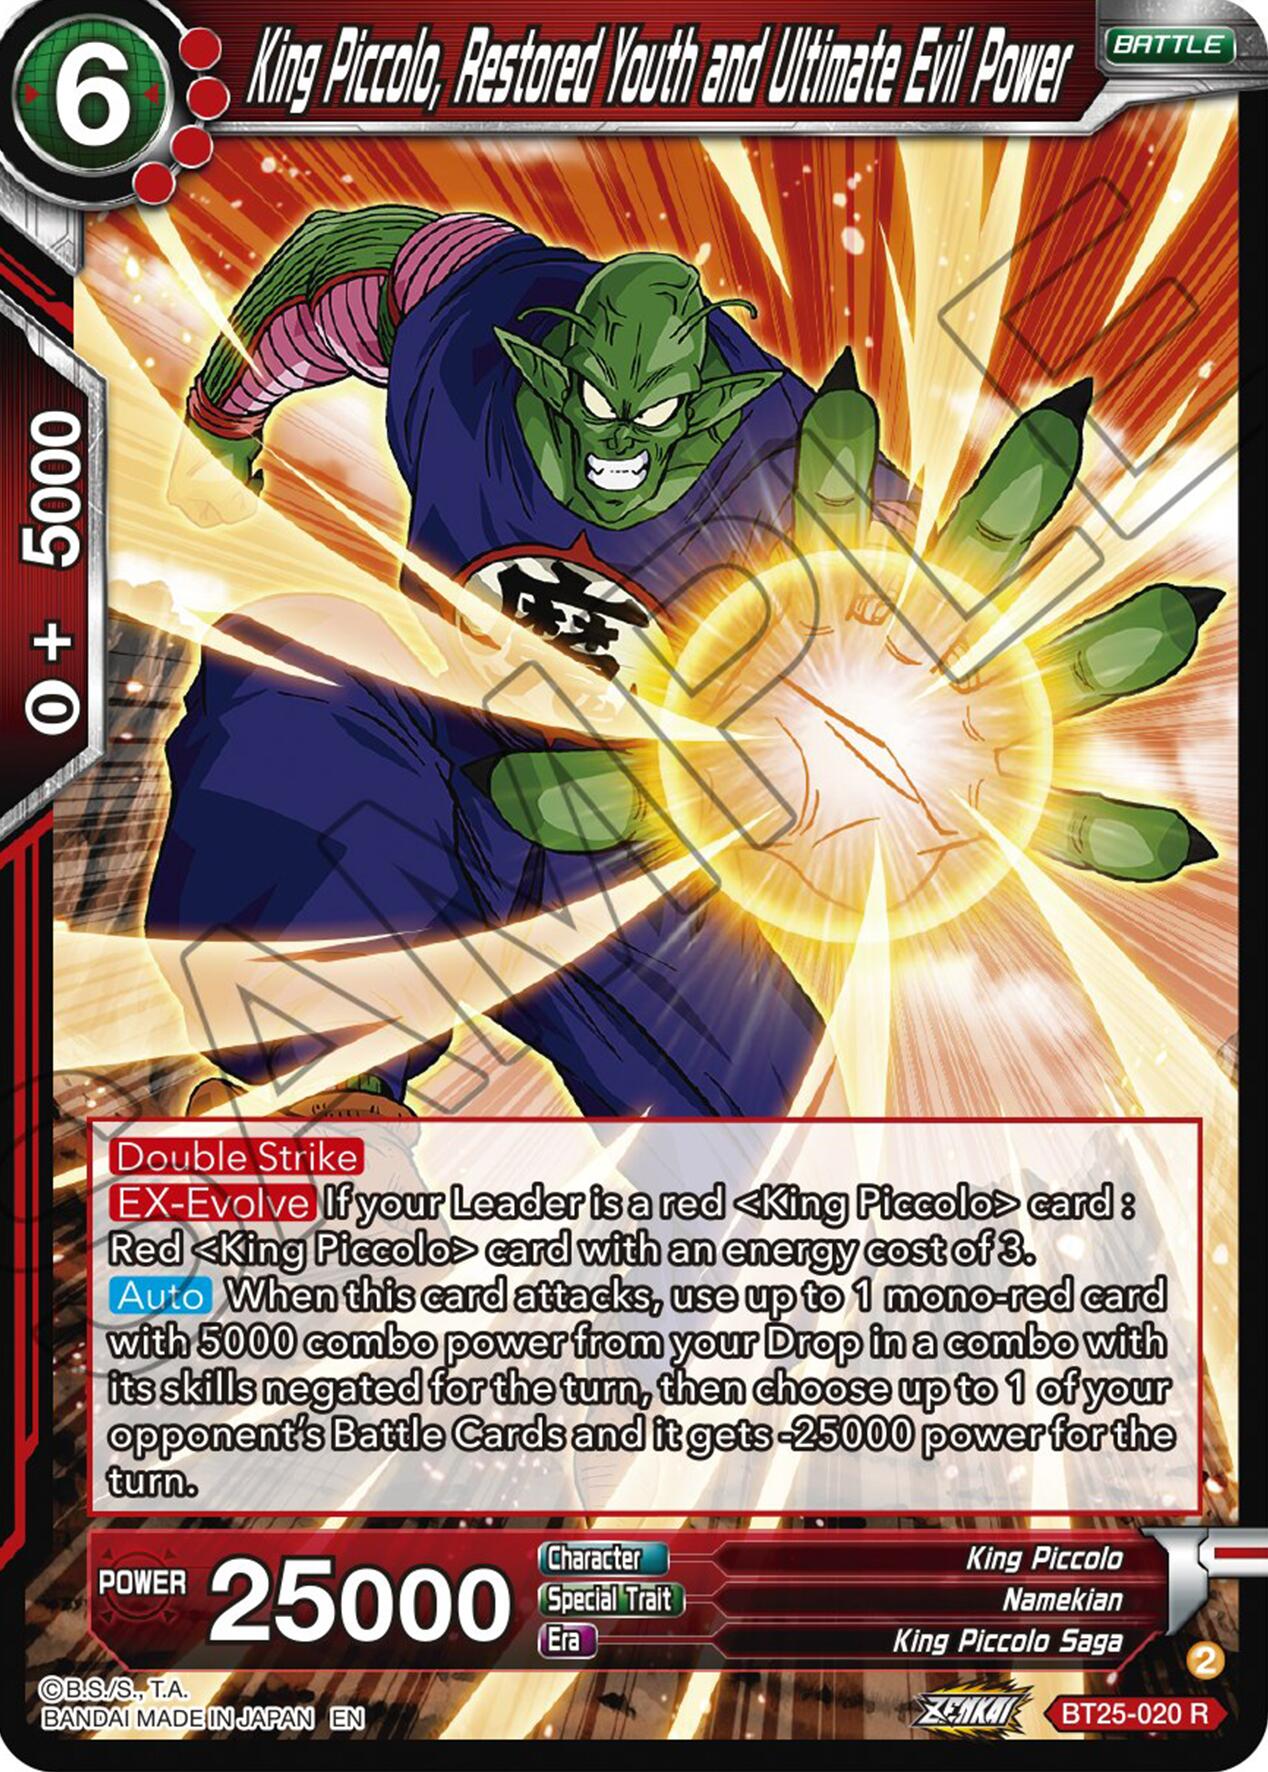 King Piccolo, Restored Youth and Ultimate Evil Power (BT25-020) [Legend of the Dragon Balls] | Fandemonia Ltd